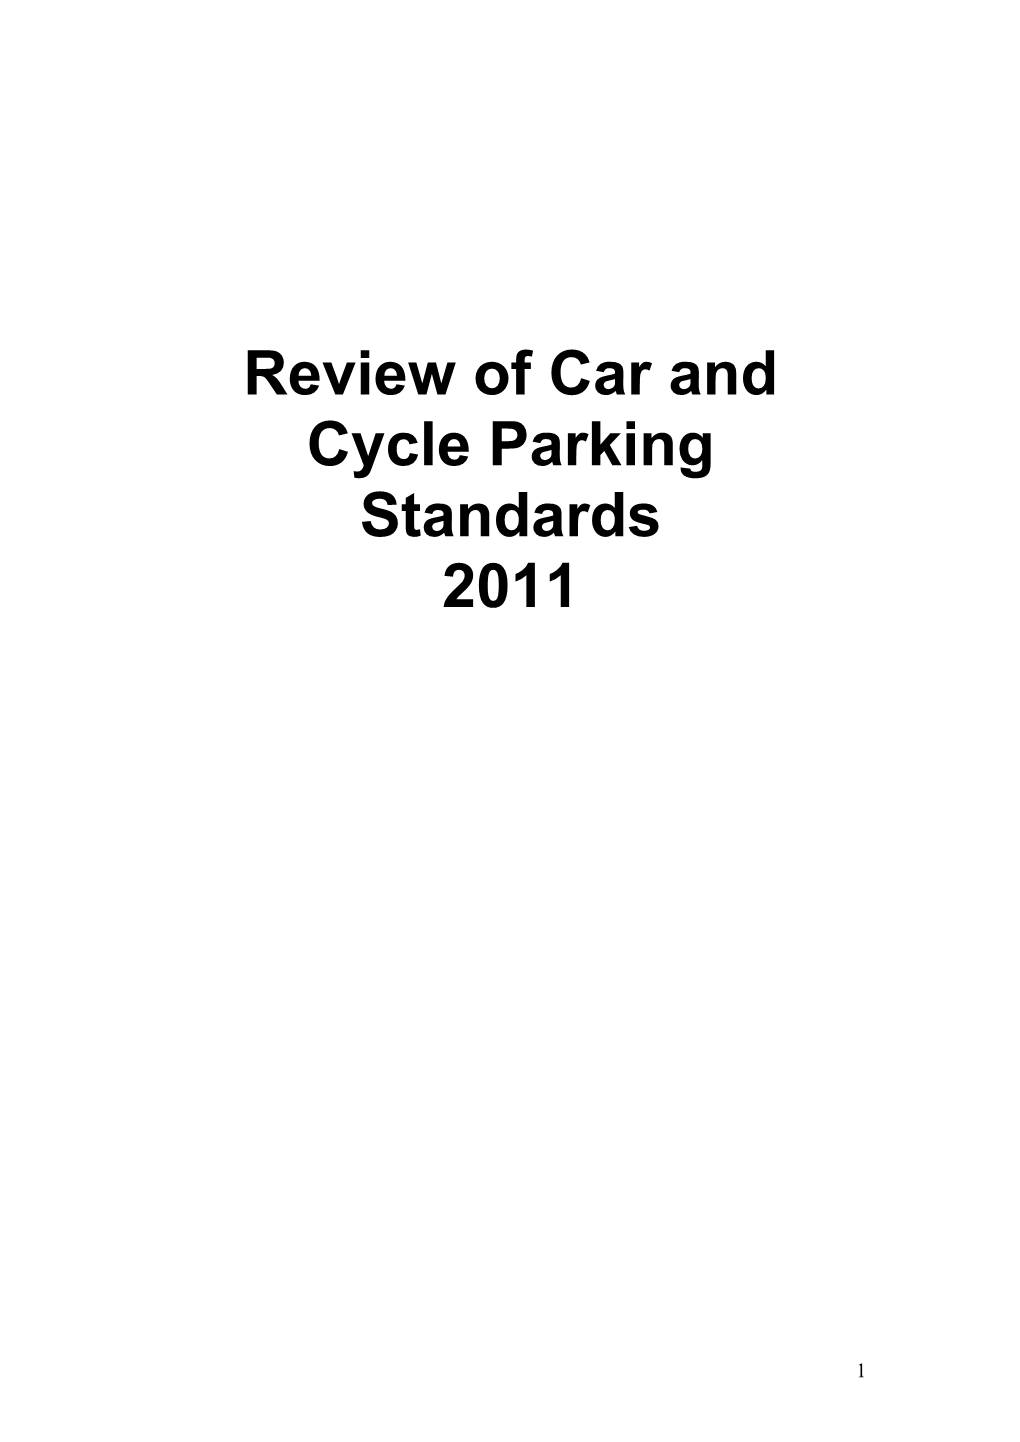 Review of Car and Cycle Parking Standards 2011